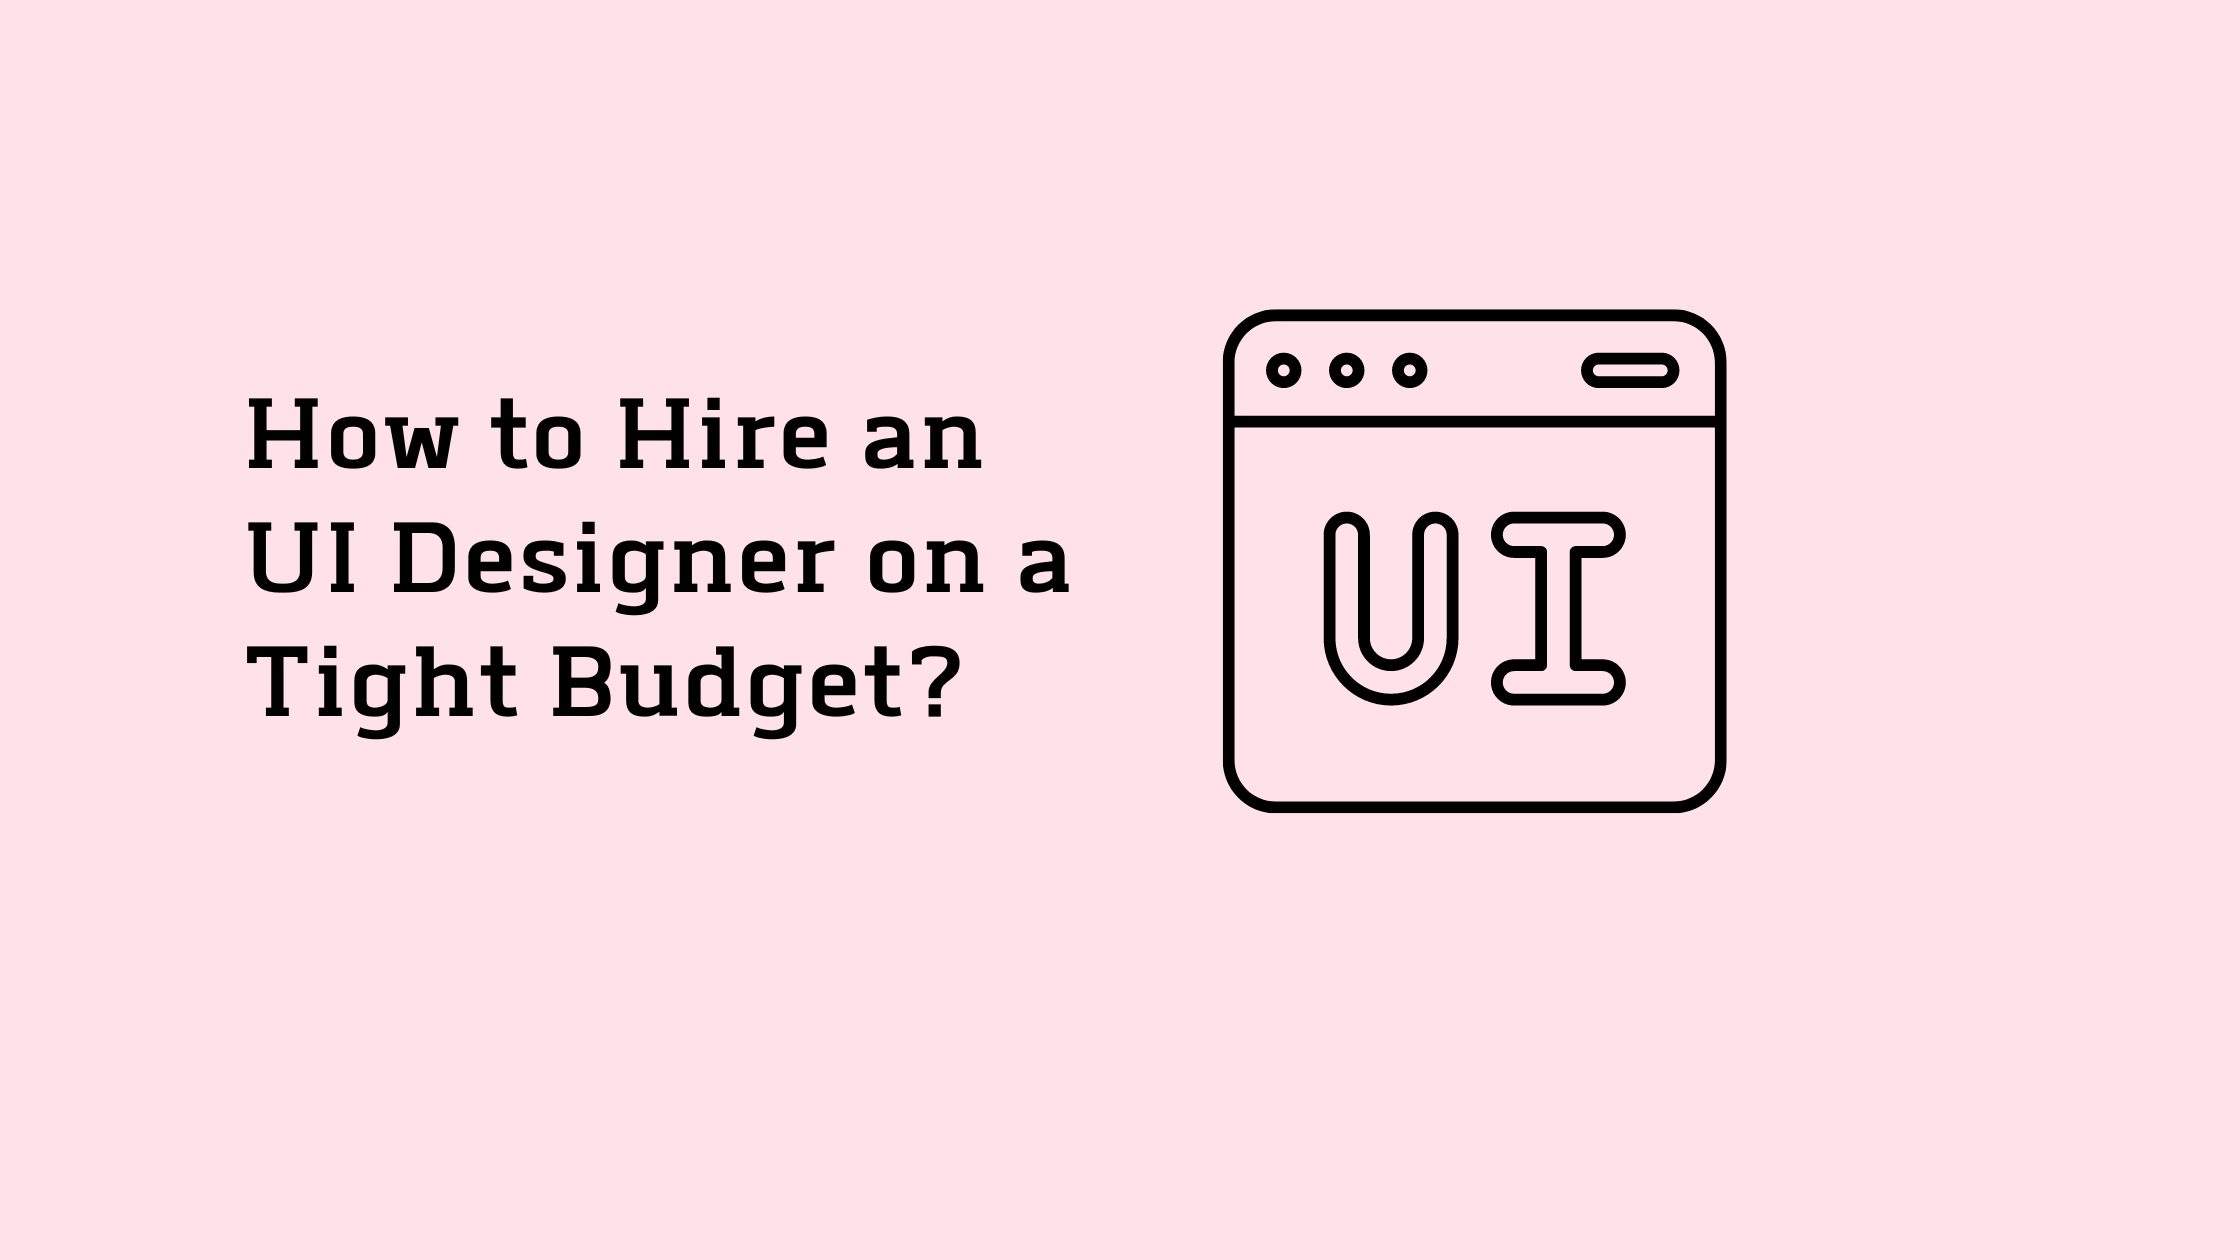 How to Hire an UI Designer on a Tight Budget